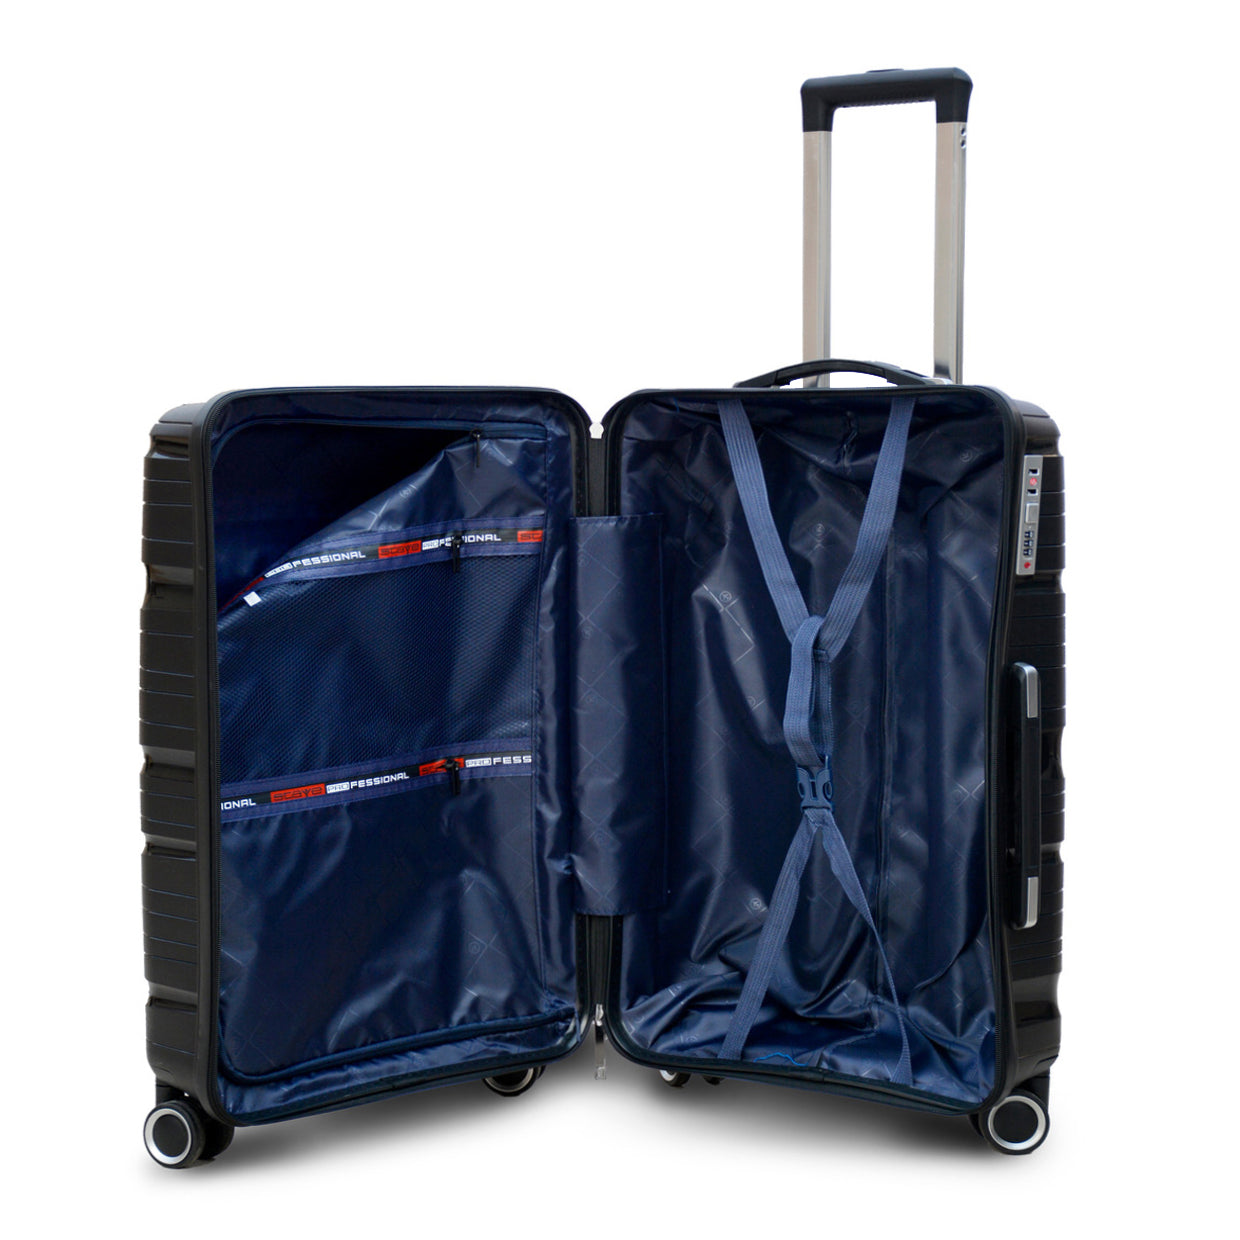 PP material Luggage | hard case trolley bag | Lightweight | 3 Pcs Set 20”24” 28”inches | 3 years warranty | PP Black | AMPPMLBK